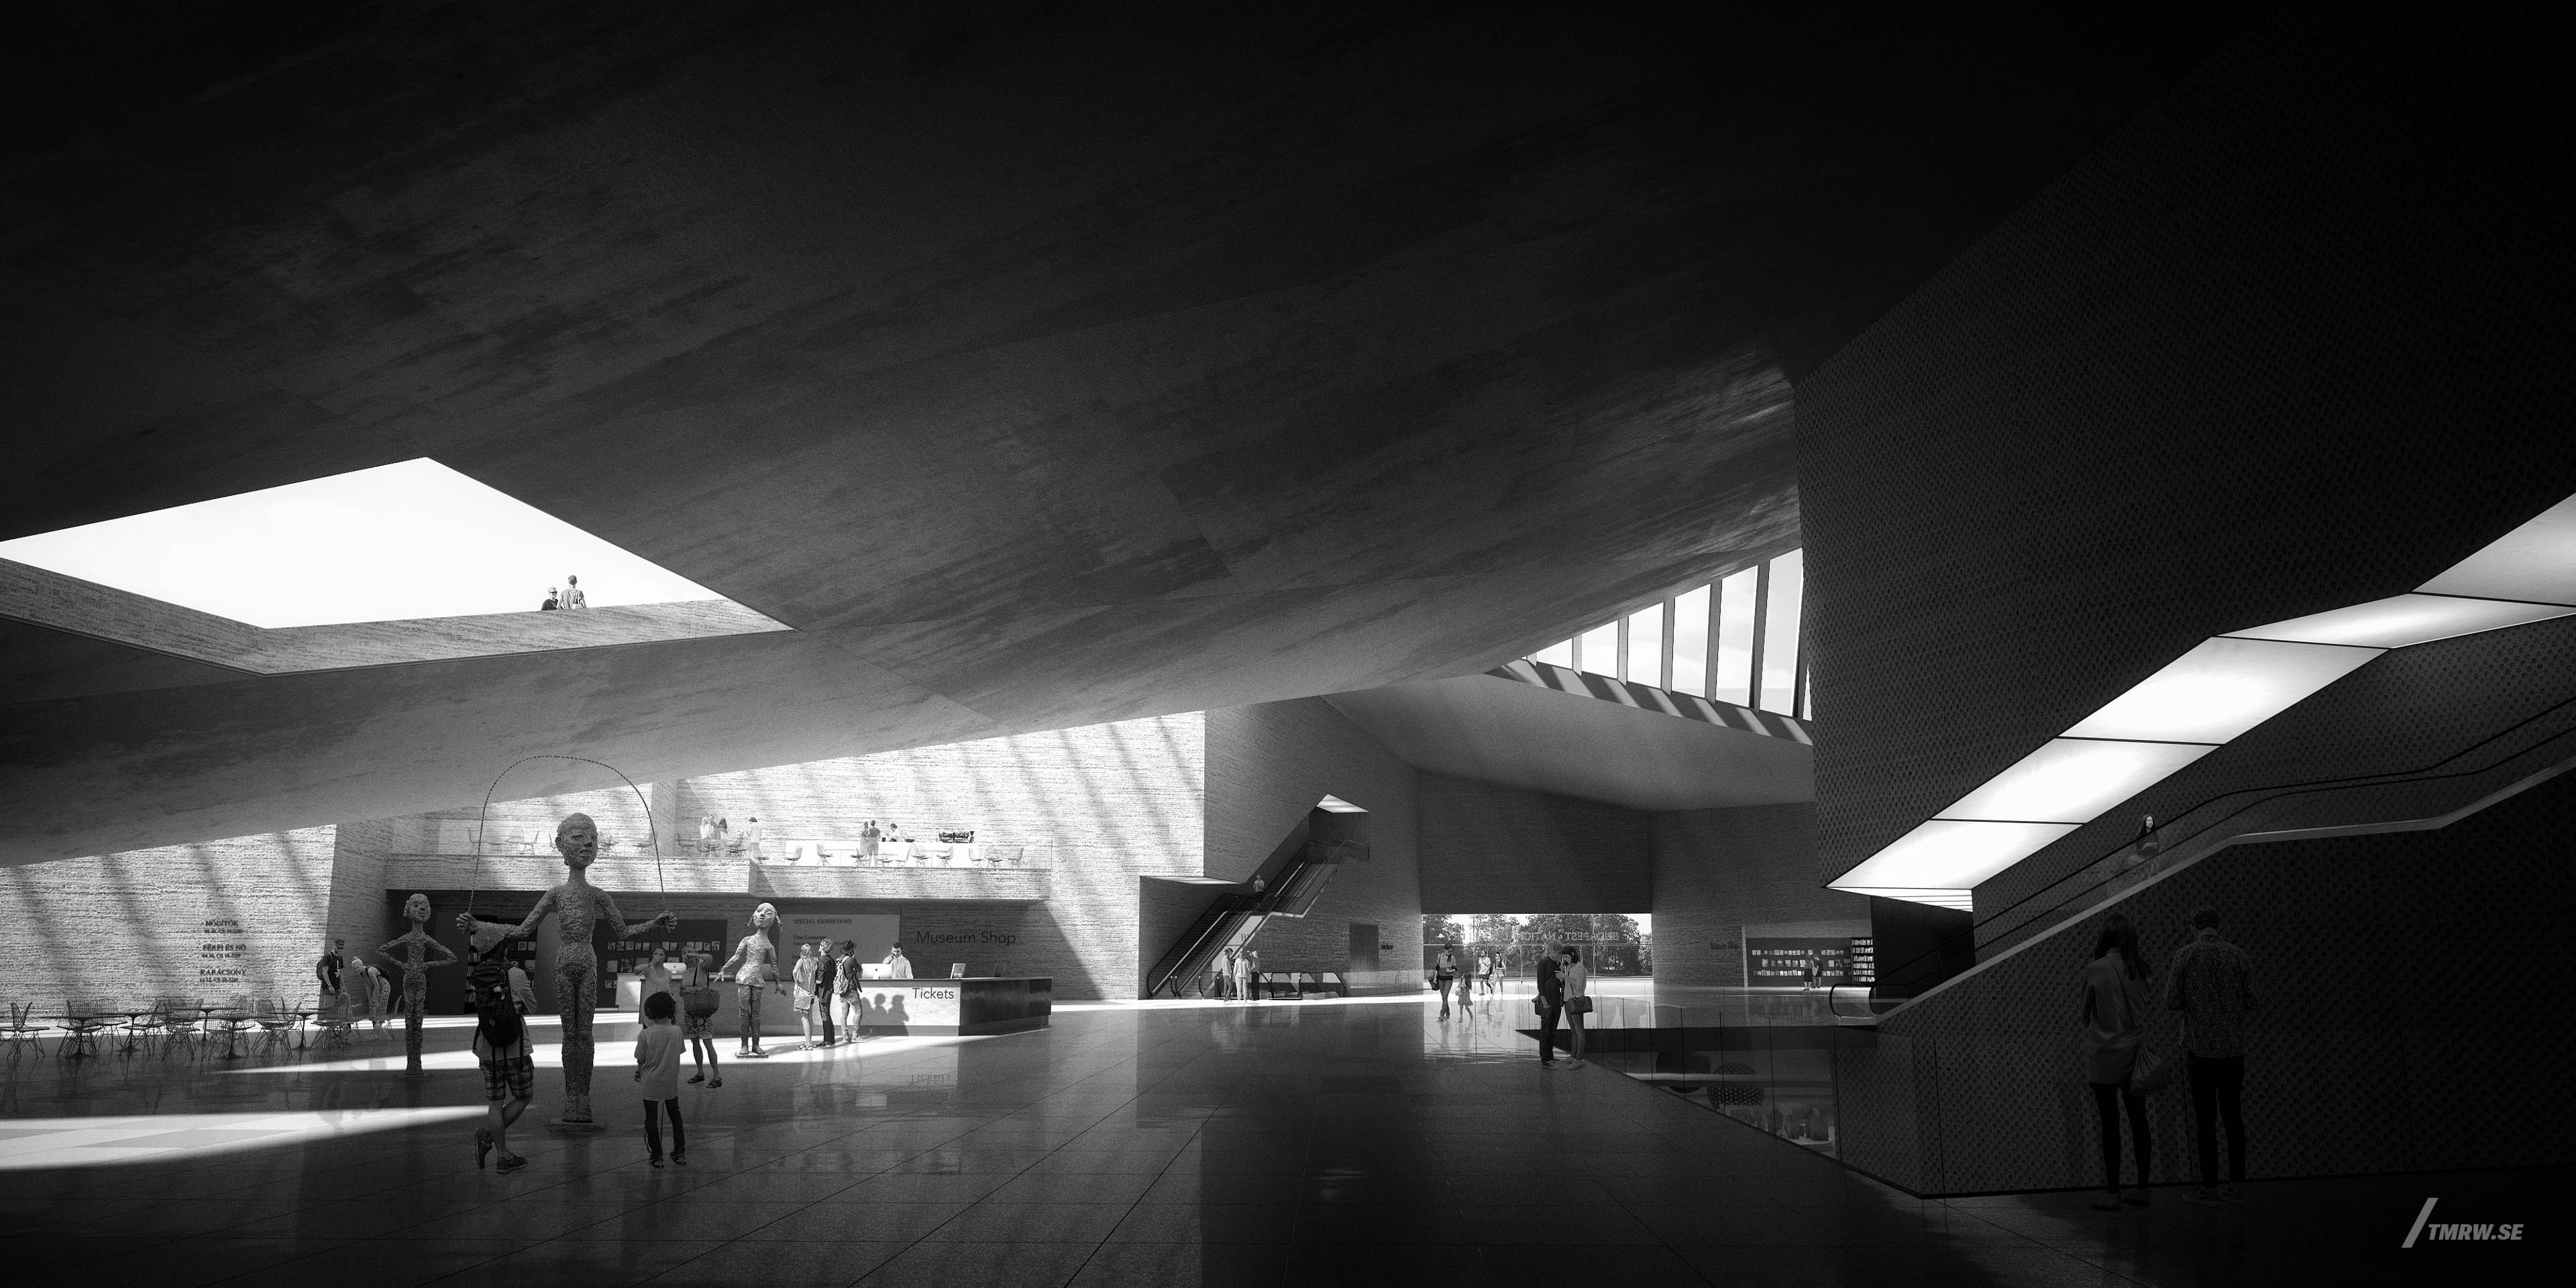 Architectural visualization of National Gallery for Snöhetta a museum building in black and white from an interior view.